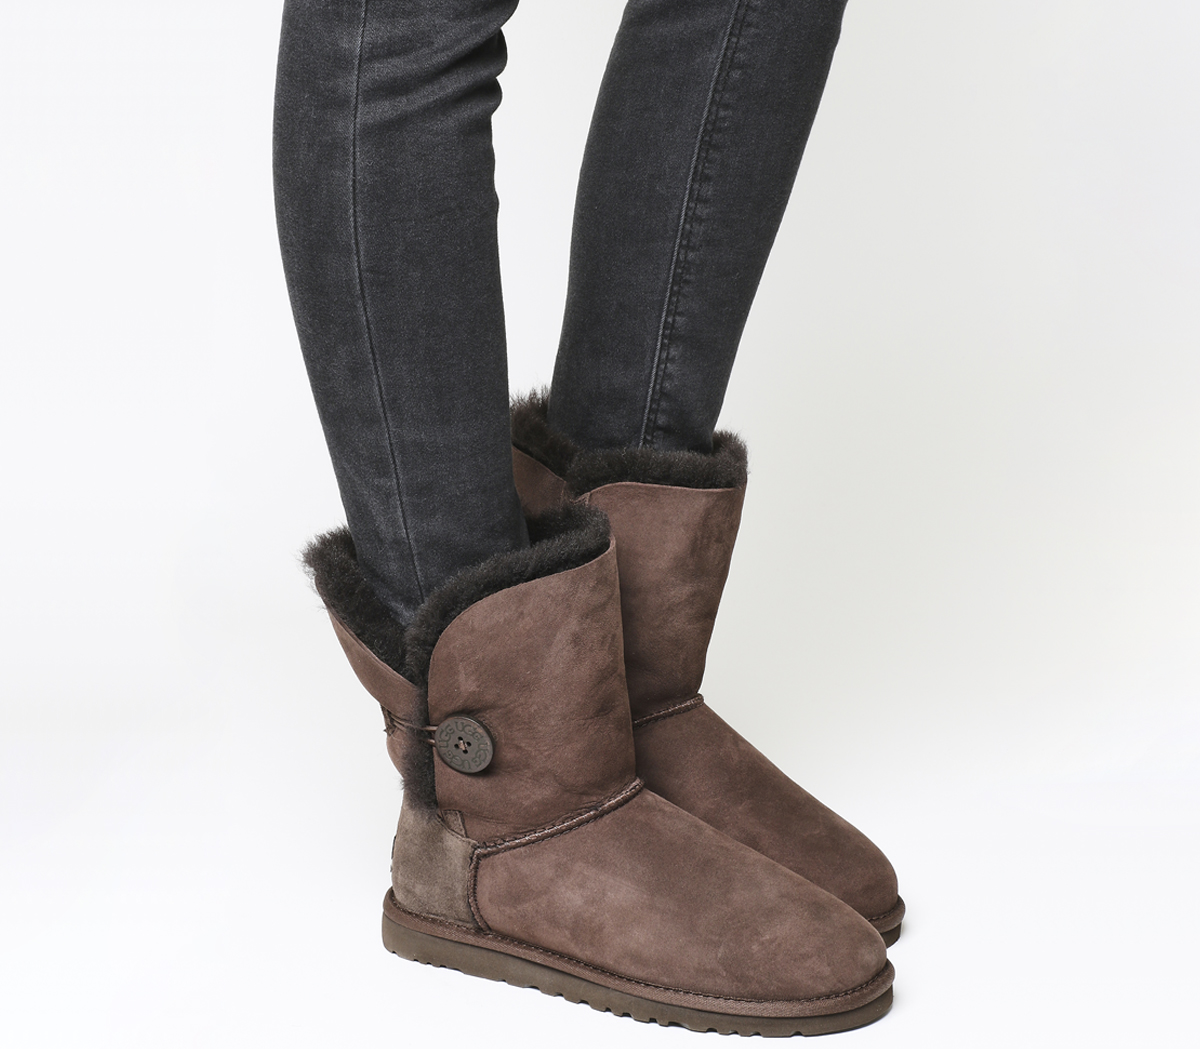 bailey button ugg boots uk